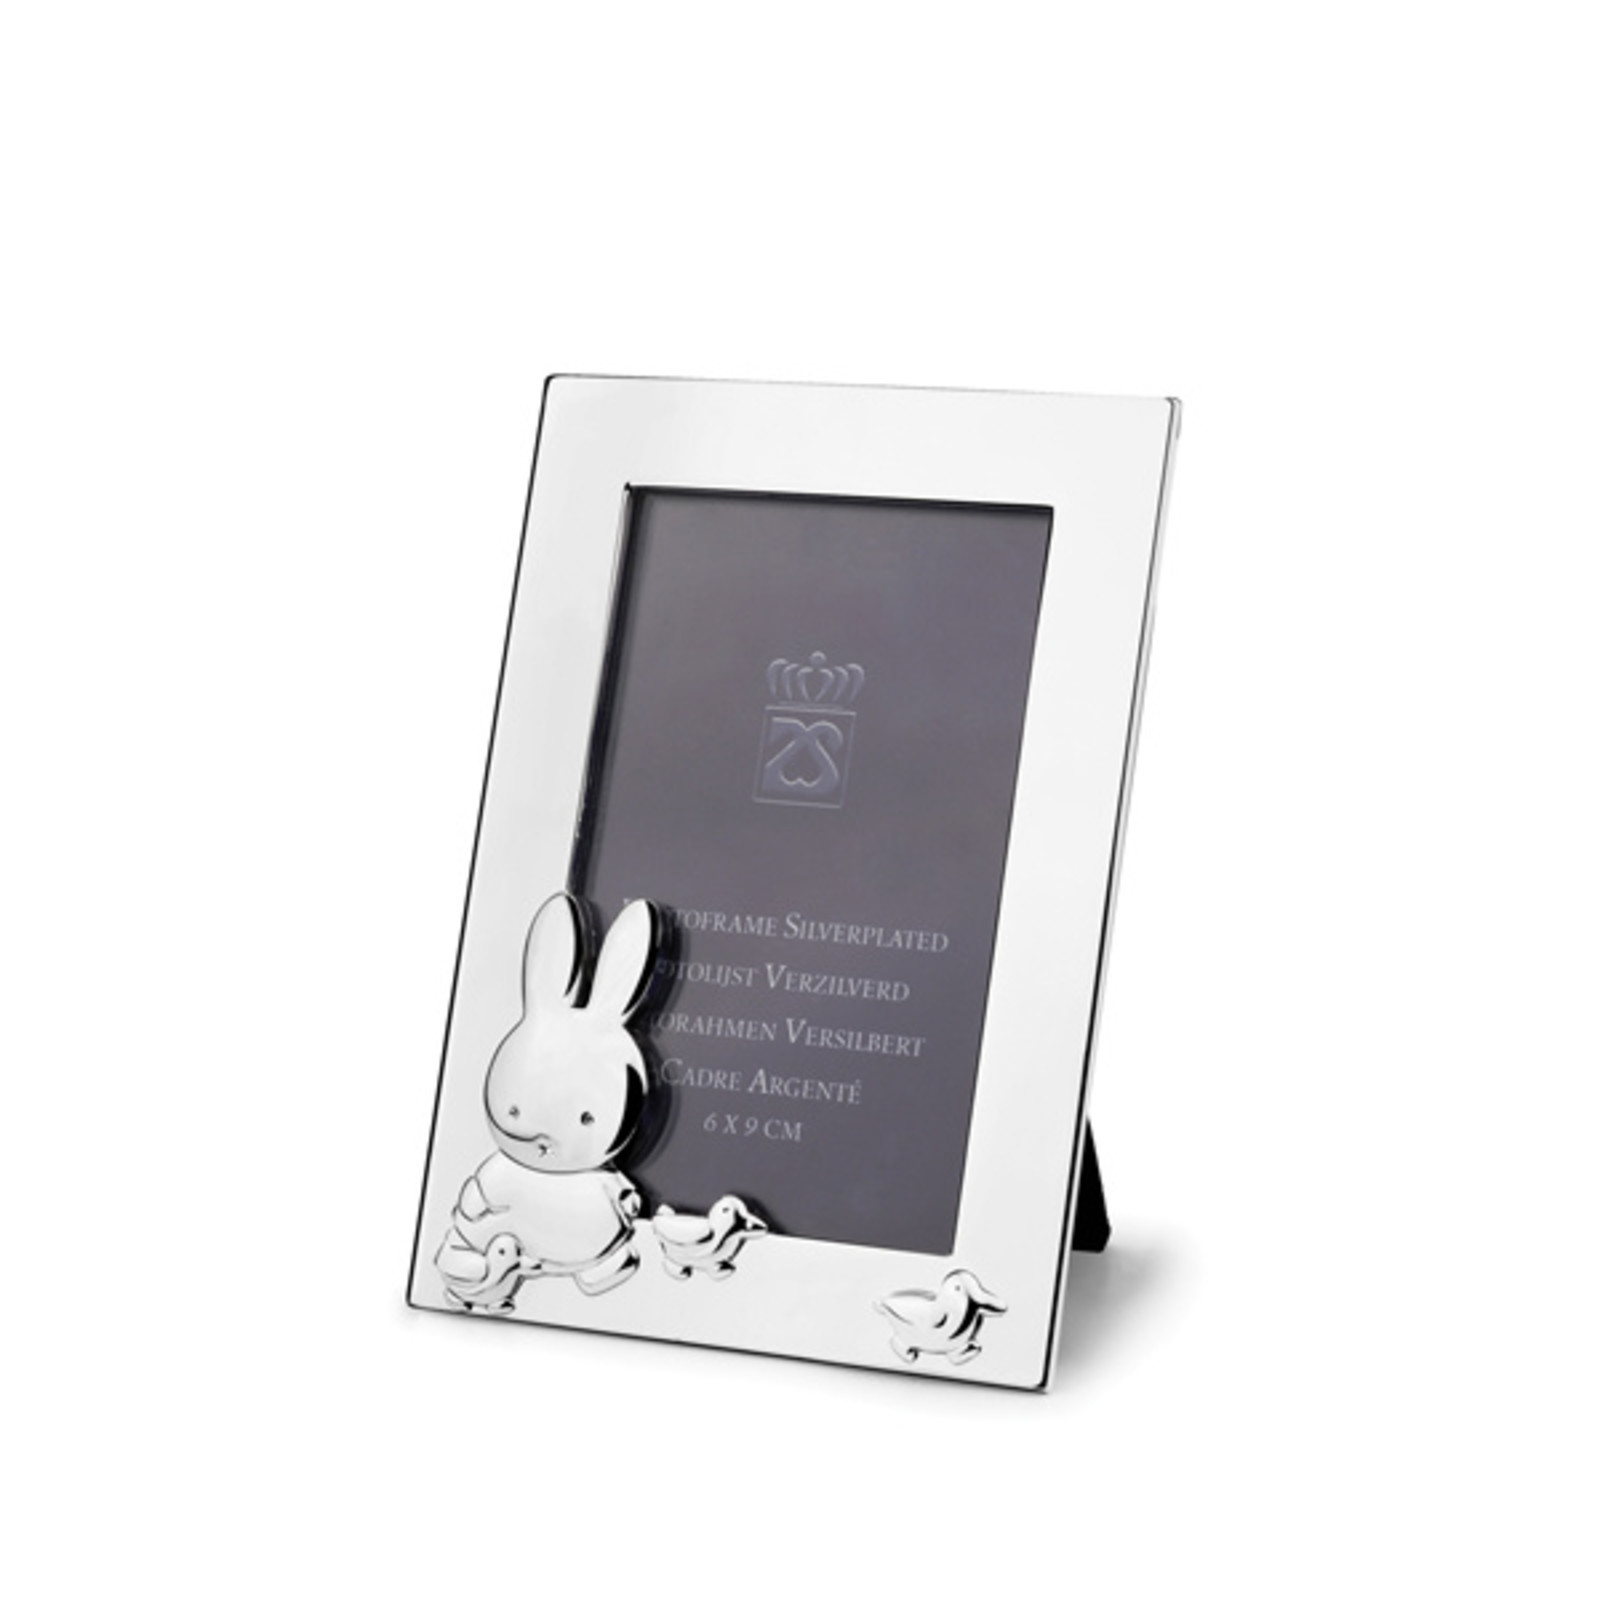 Photo frame miffy with little ducks